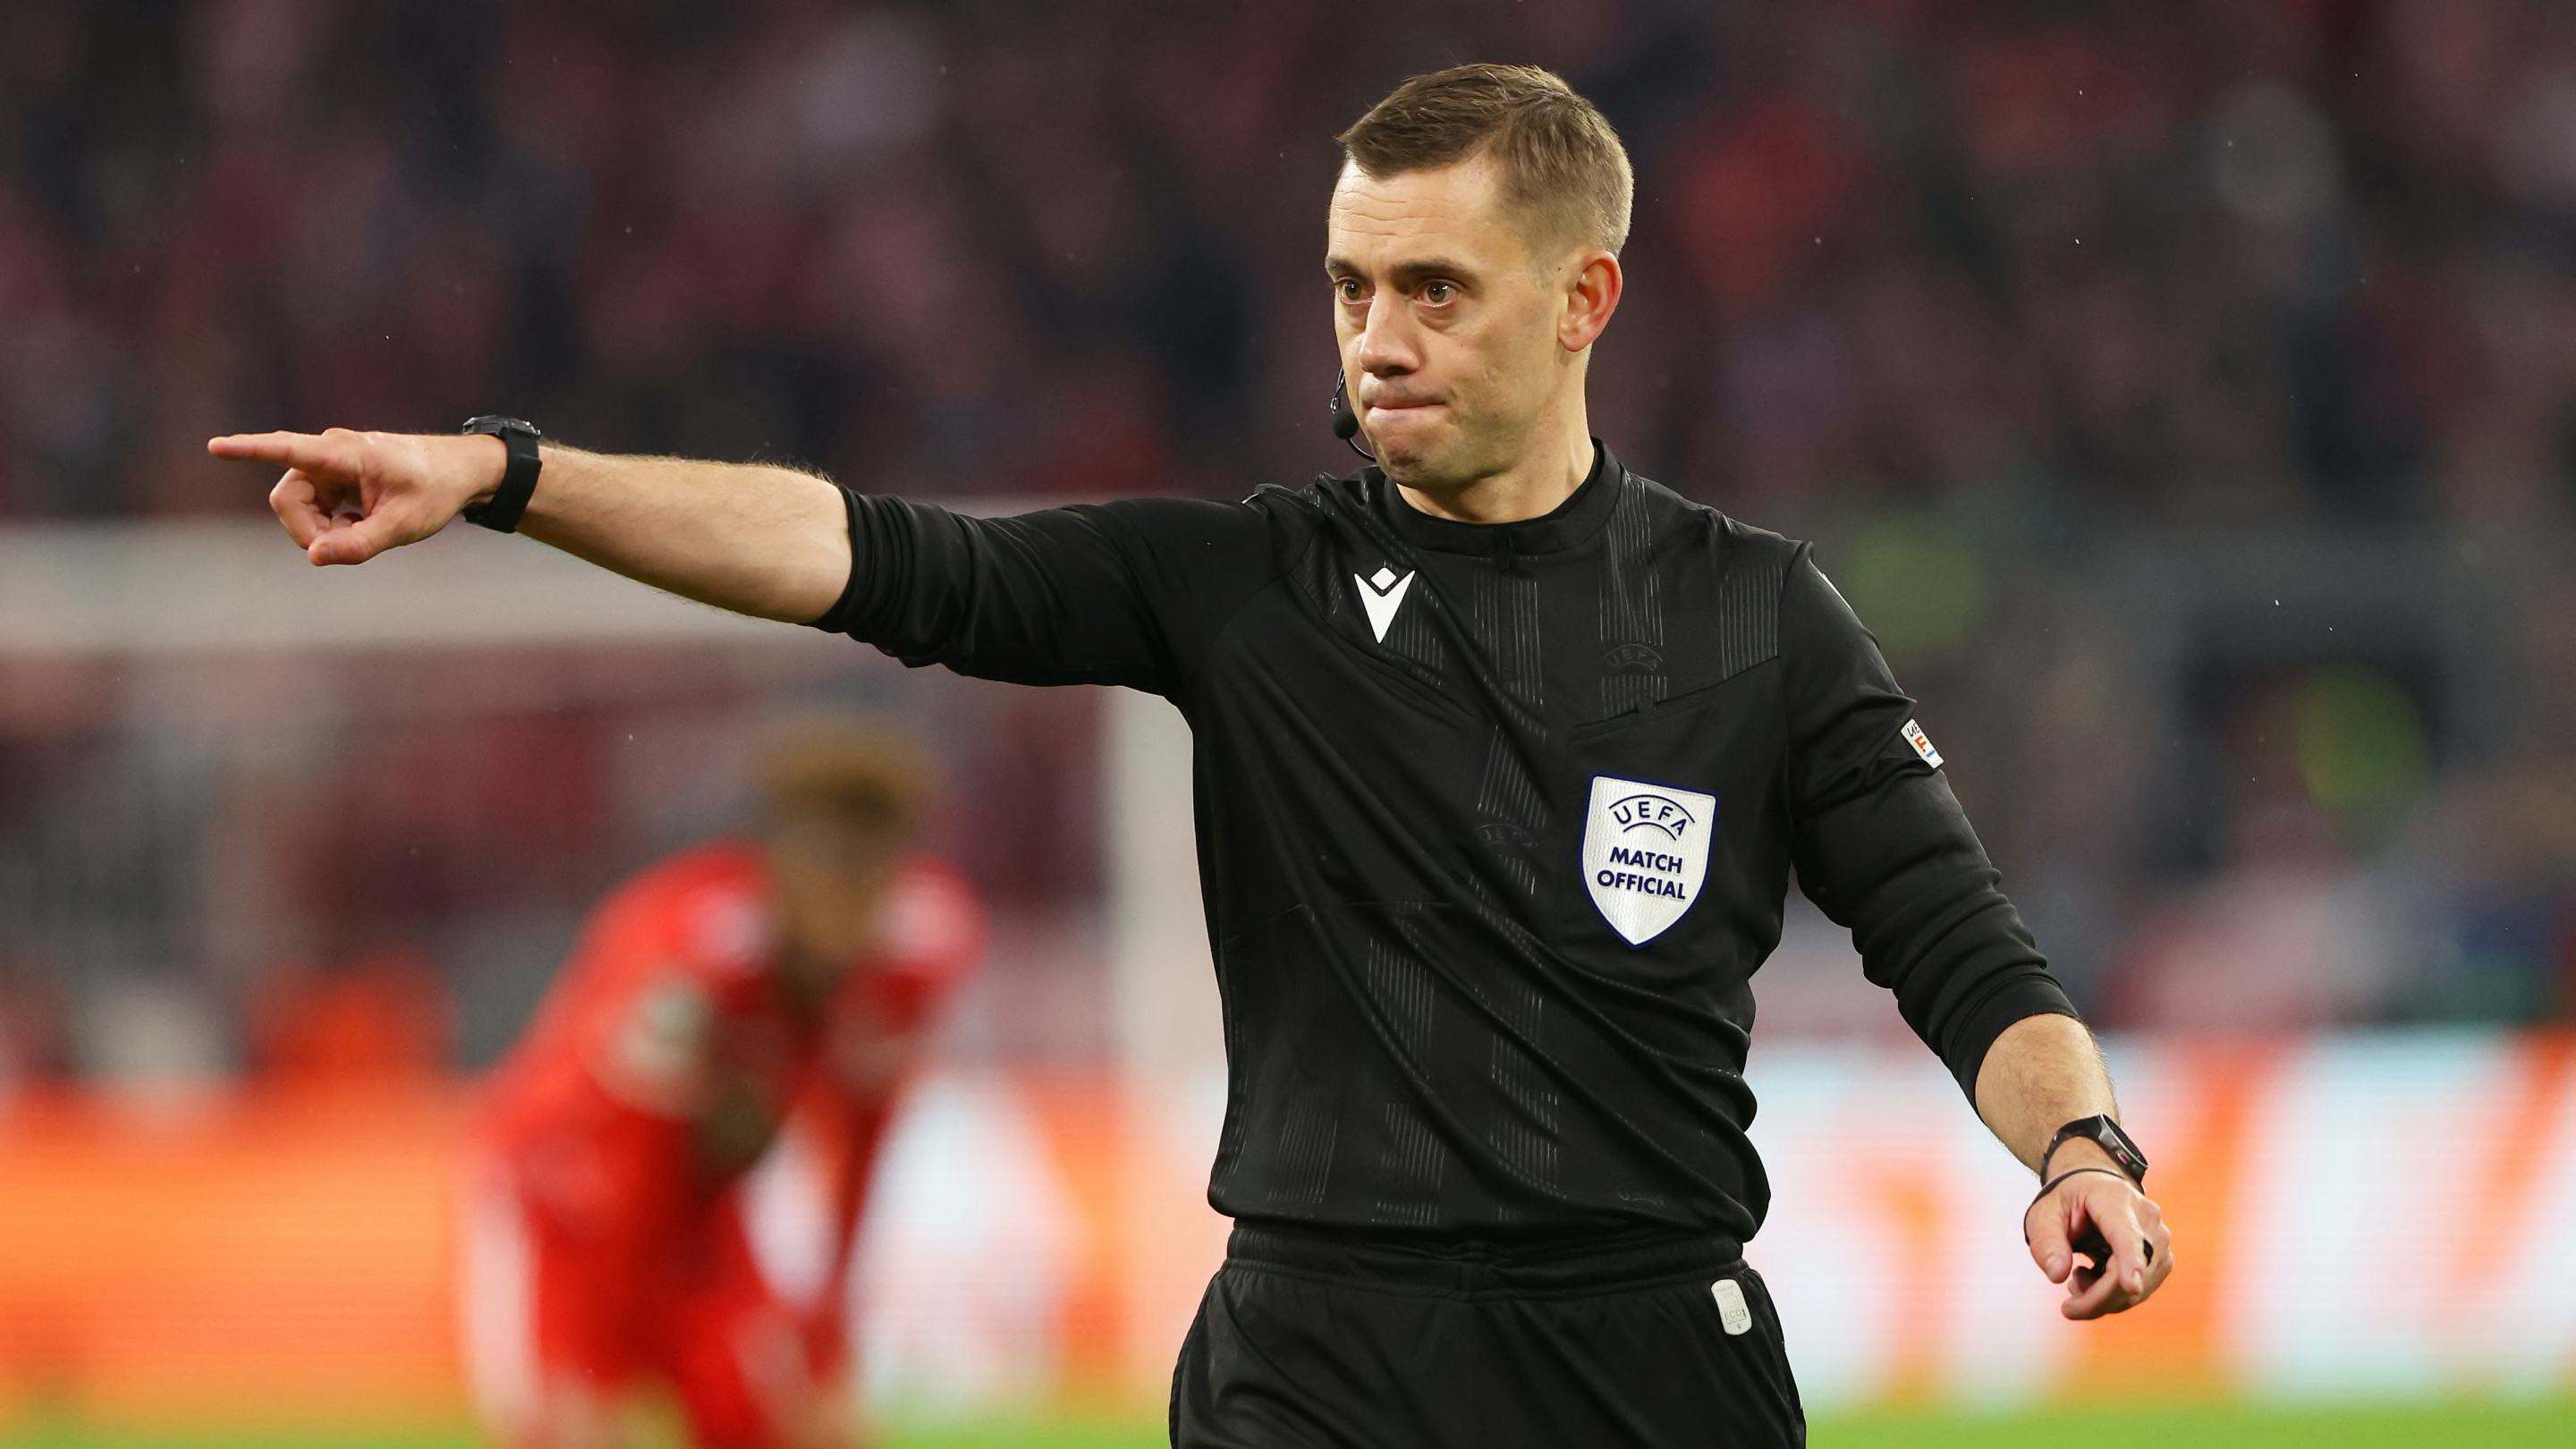 The 30 best referees in world football - ranked